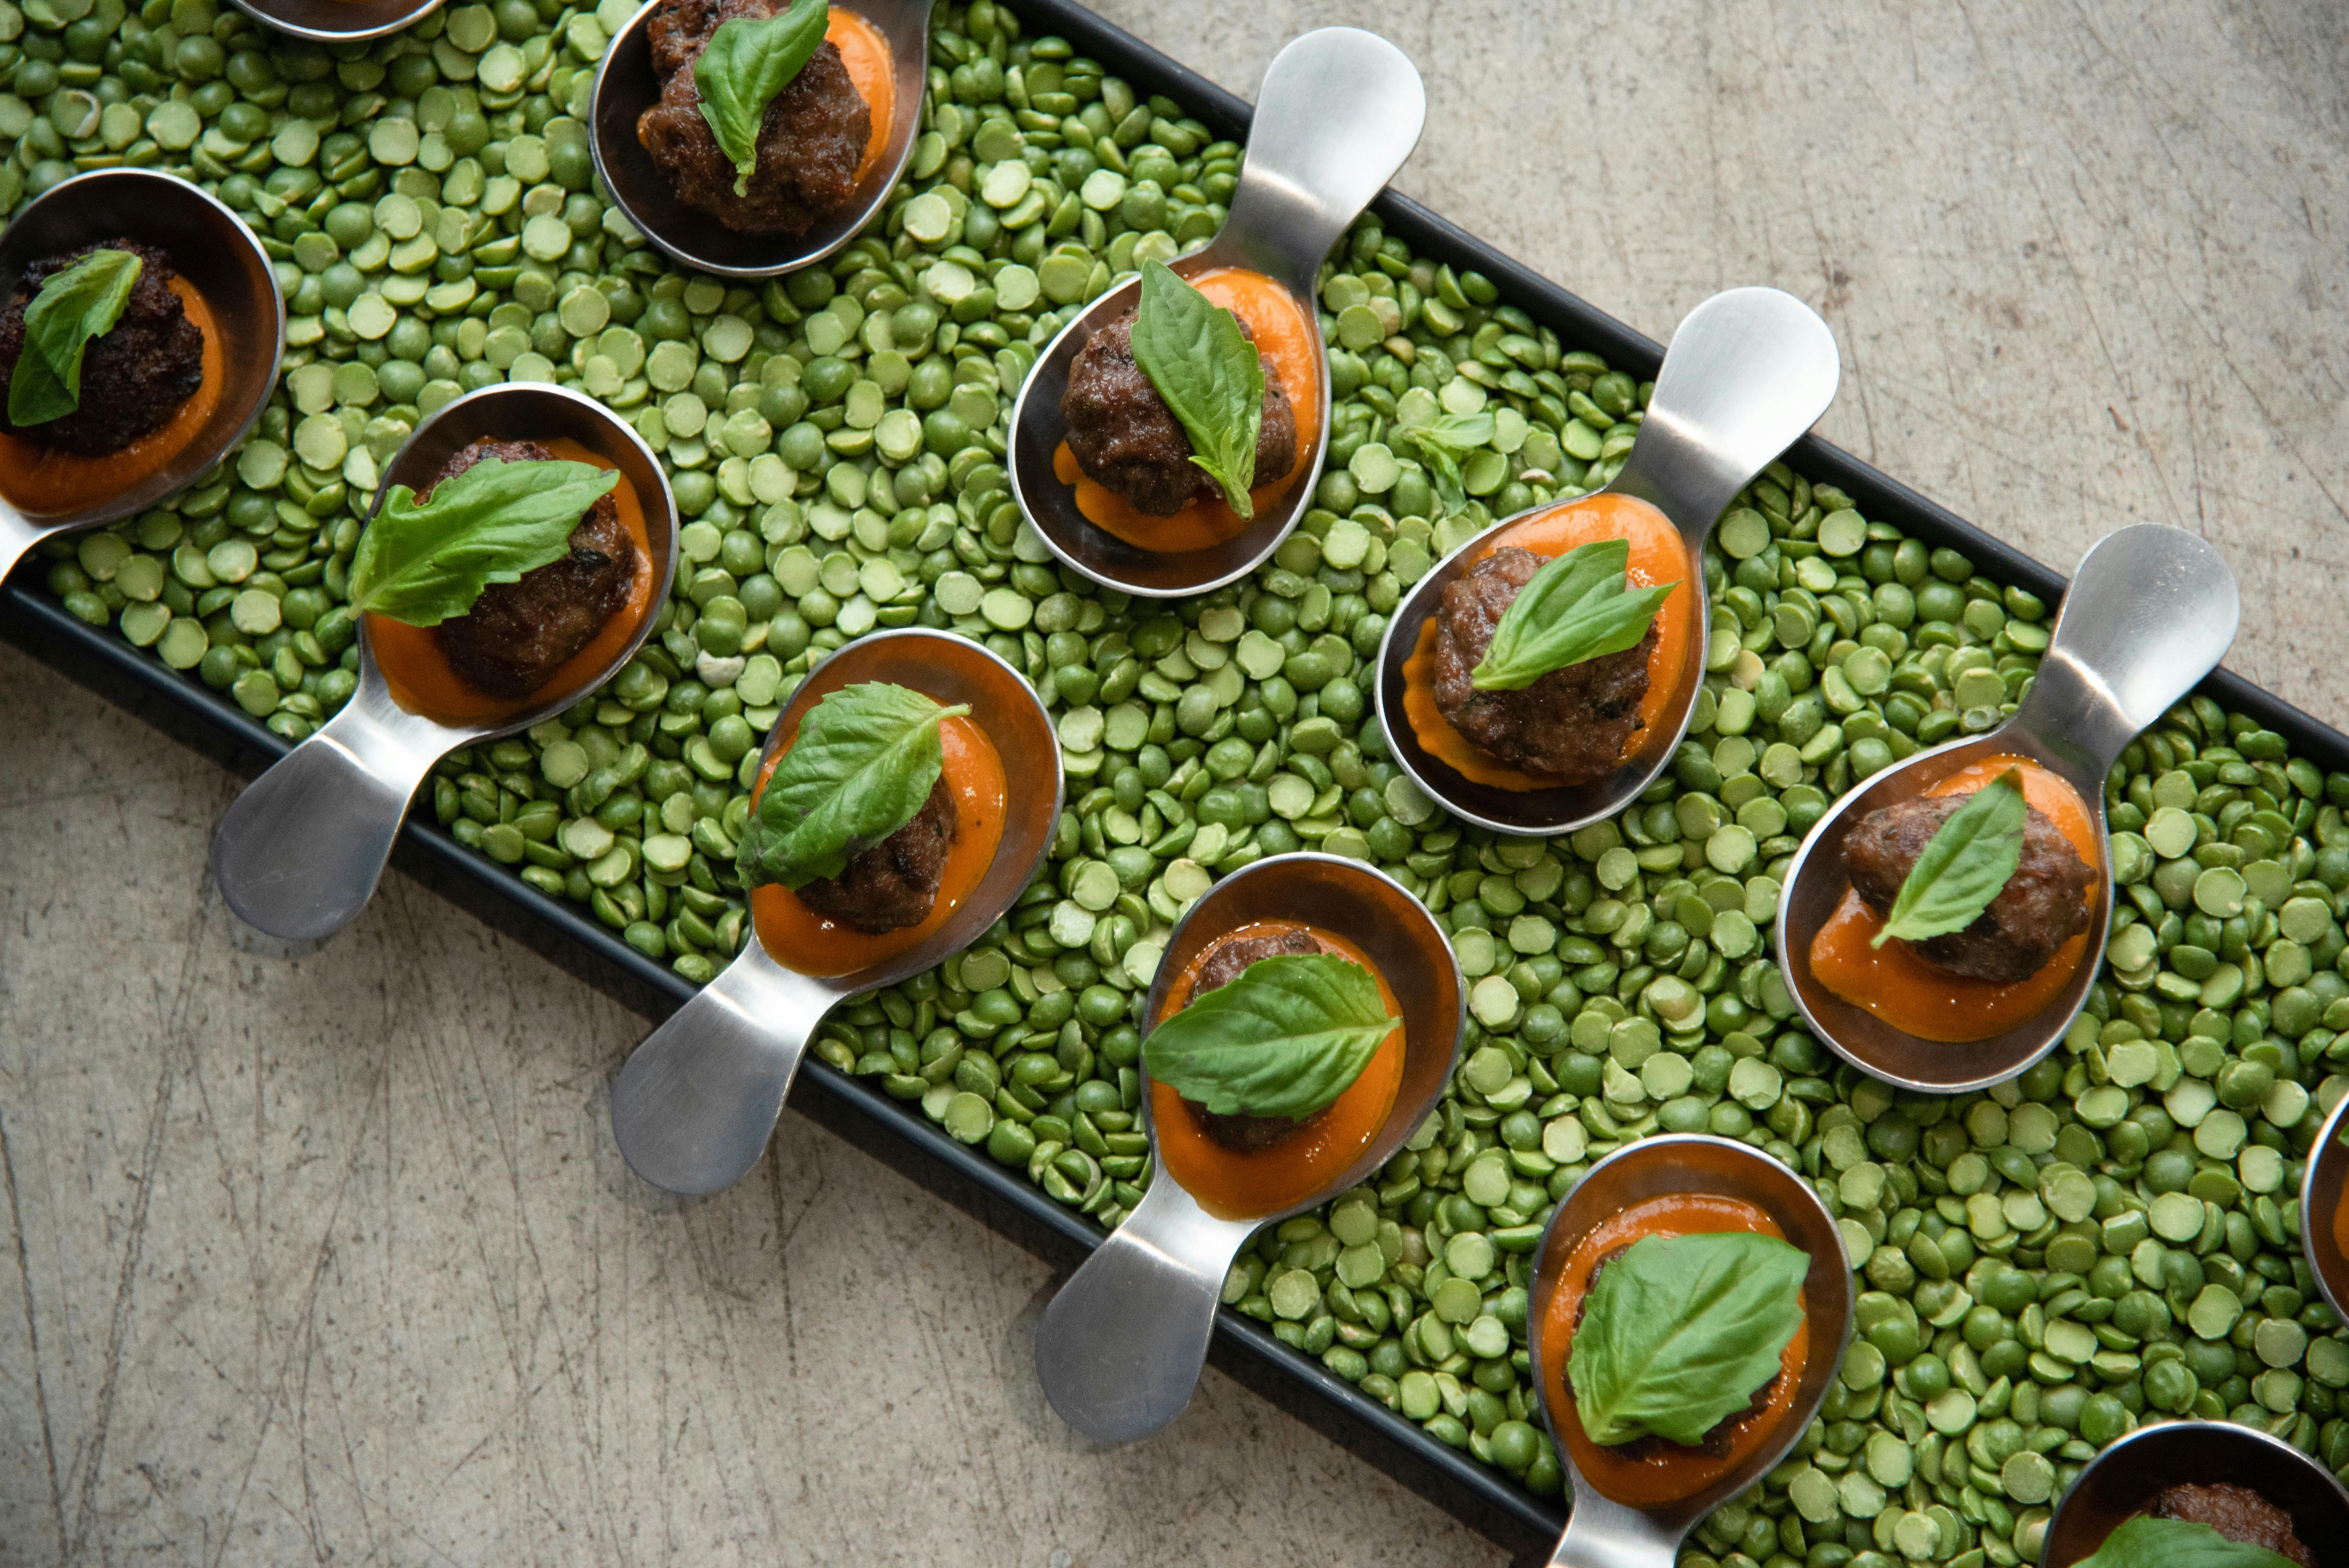 Corporate dinner party with passed appetizer trays filled with dried green peas.